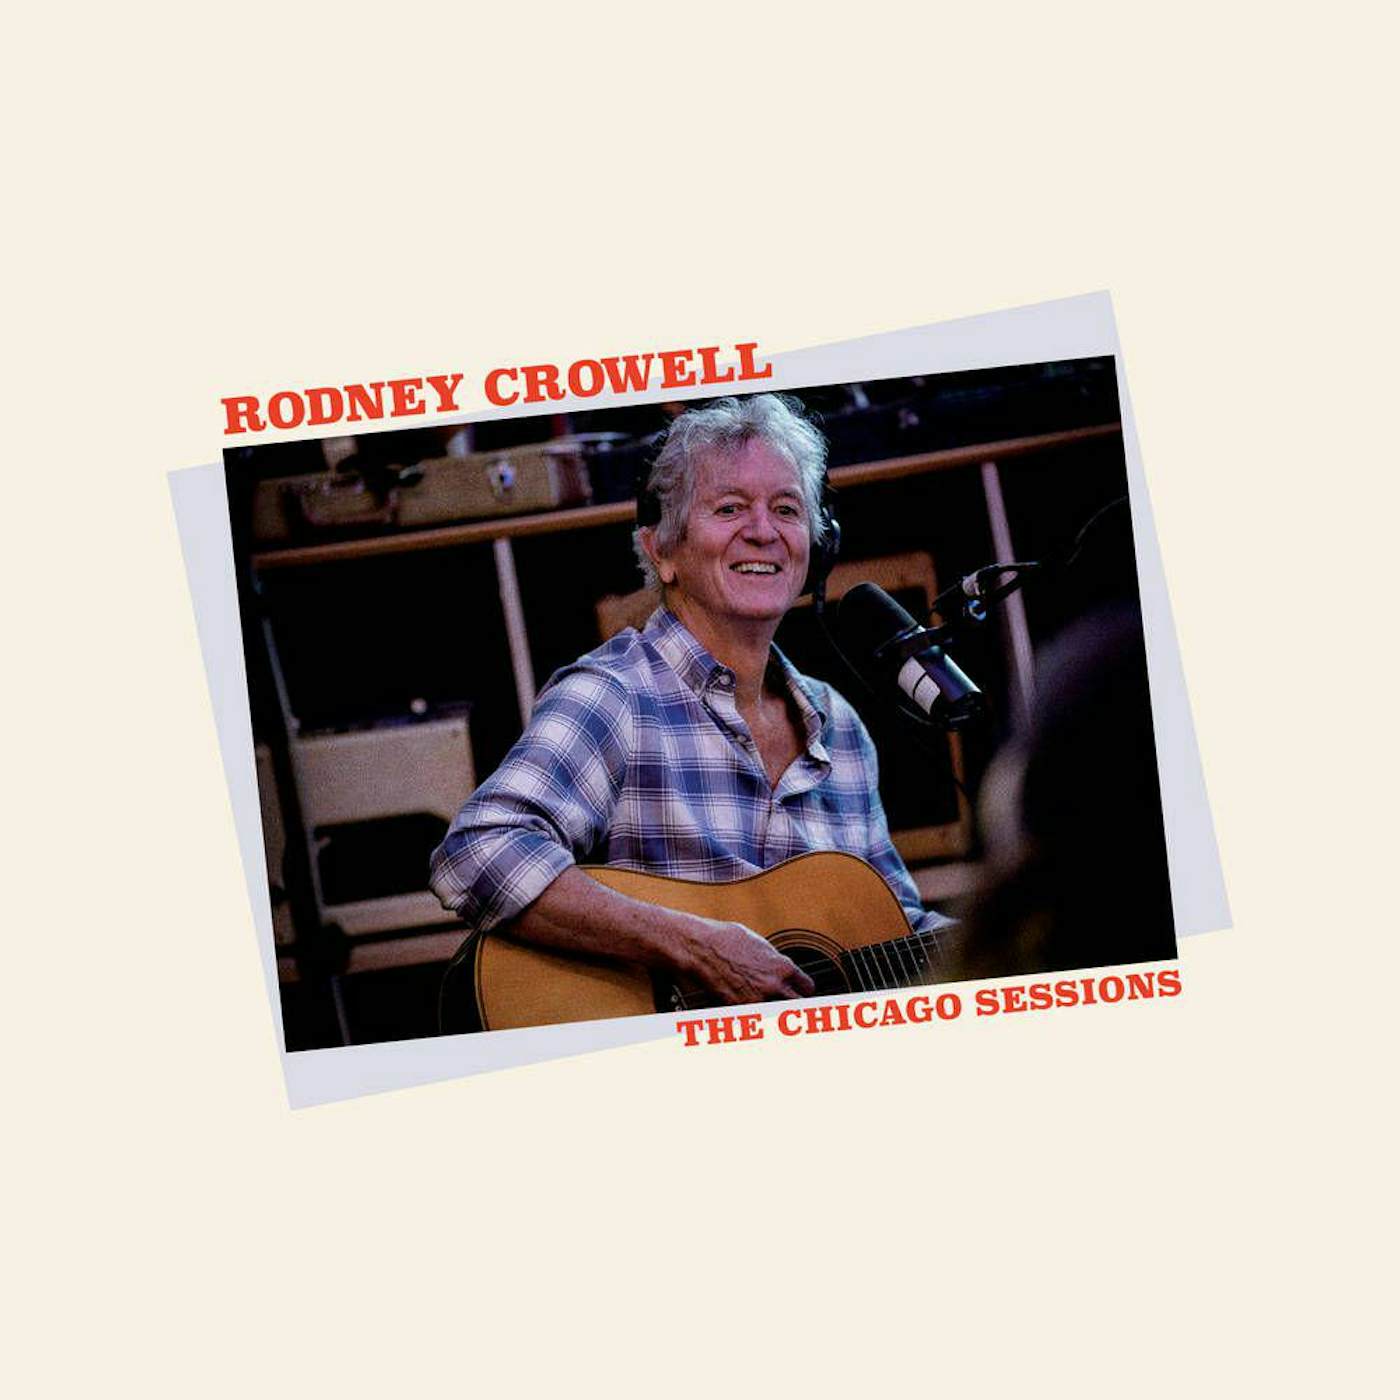 Rodney Crowell The Chicago Sessions Vinyl Record